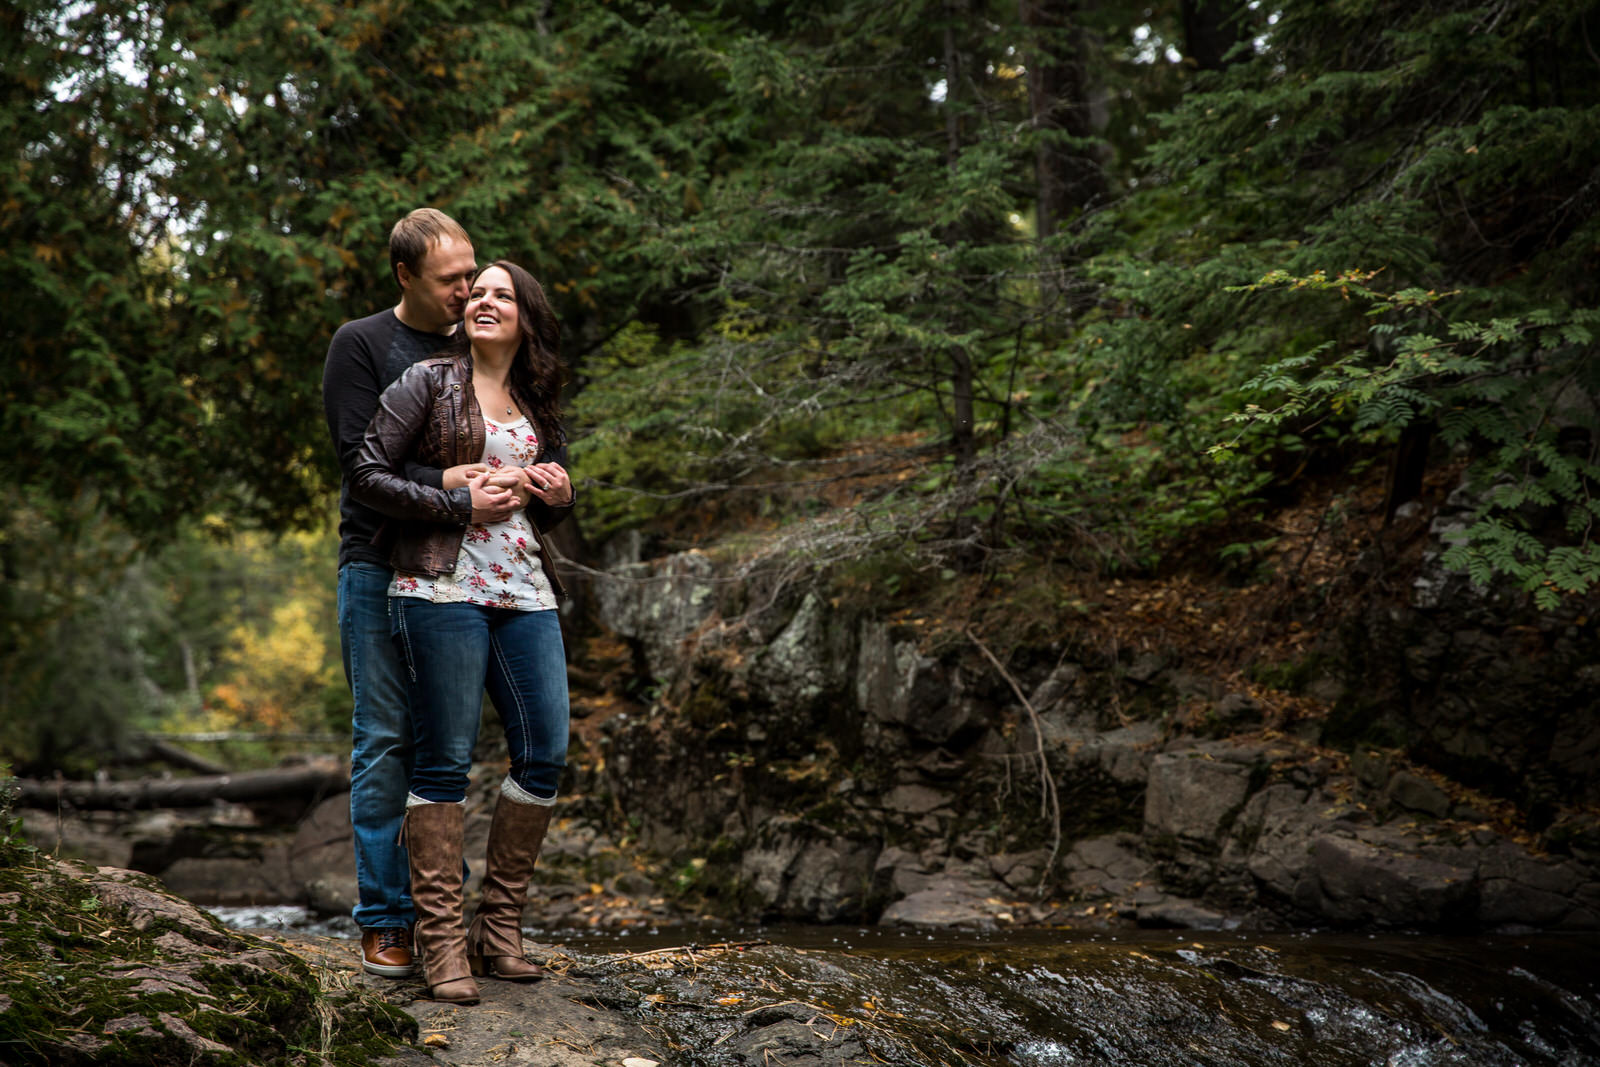 Gooseberry Falls Engagement Session couple embracing in nature